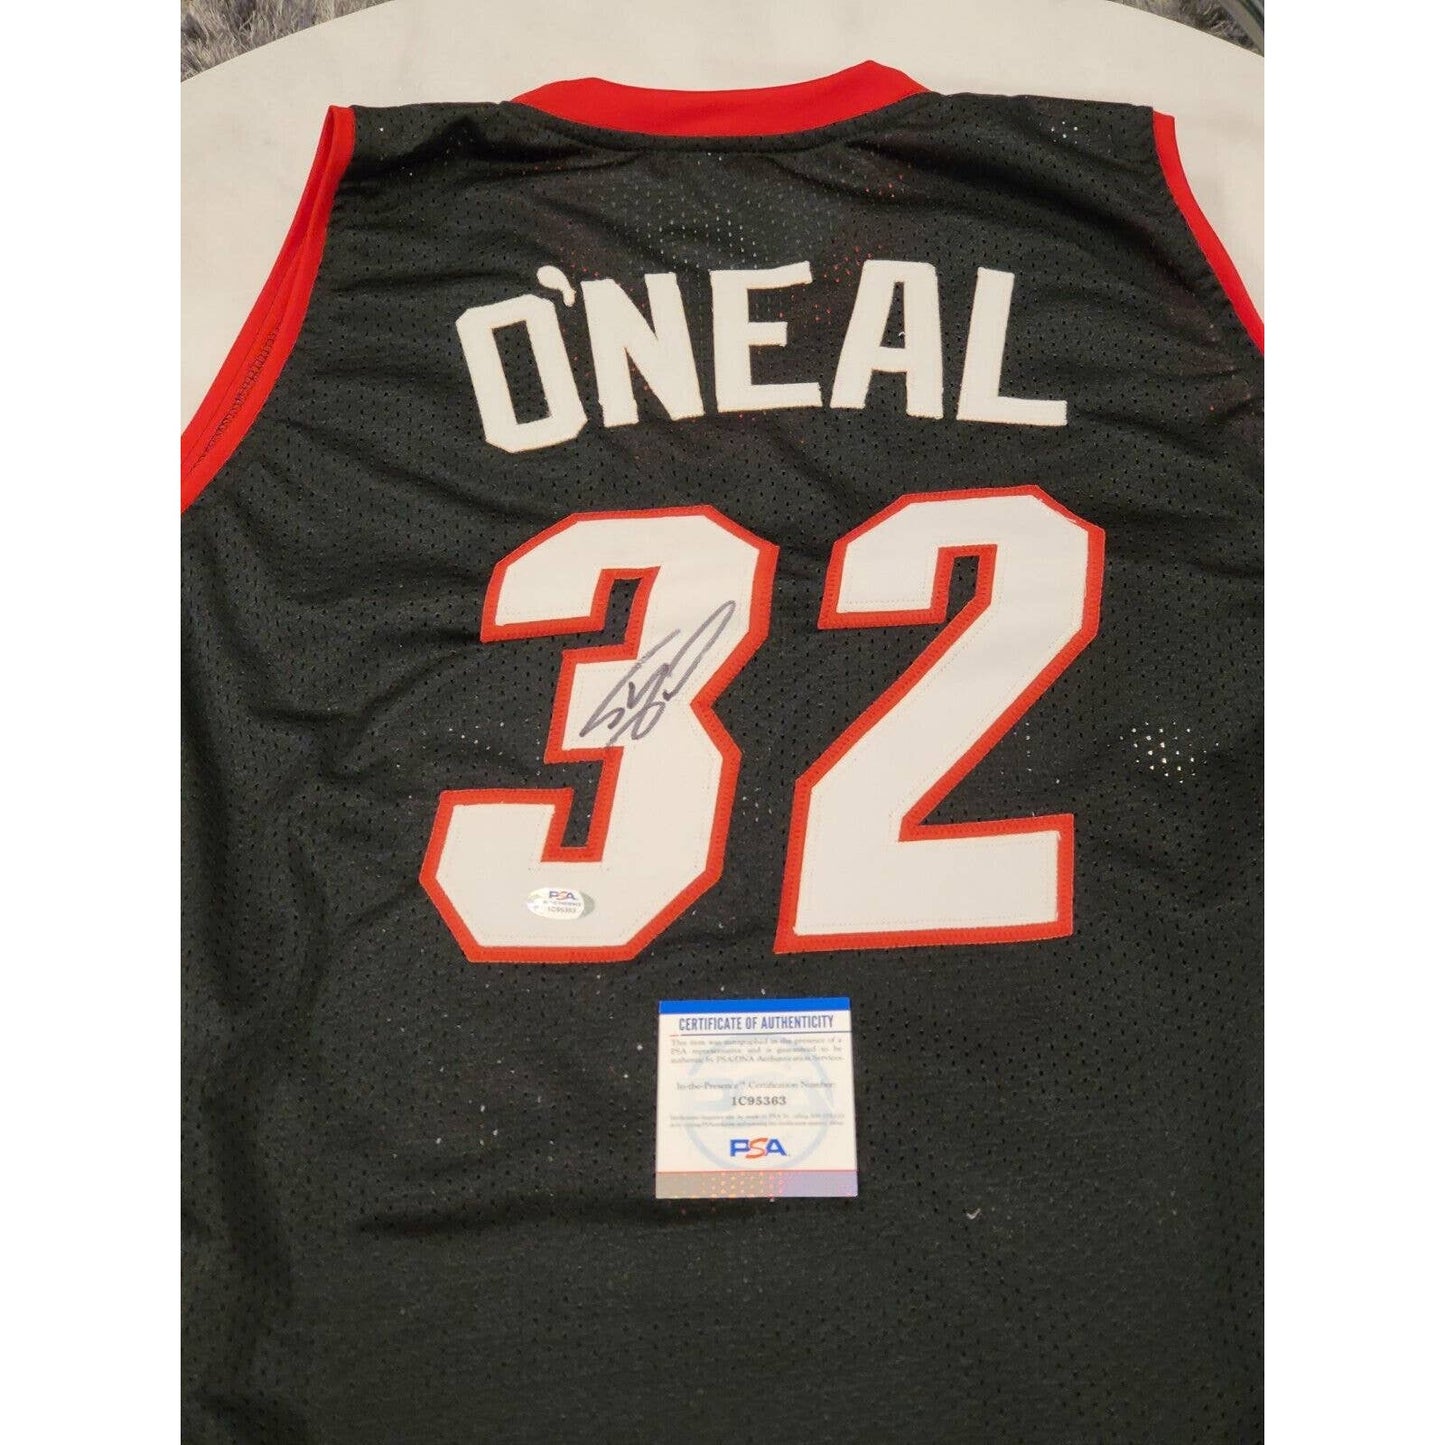 Shaquille O’Neal Autographed/Signed Jersey PSA/DNA COA Miami Heat Shaq - TreasuresEvolved